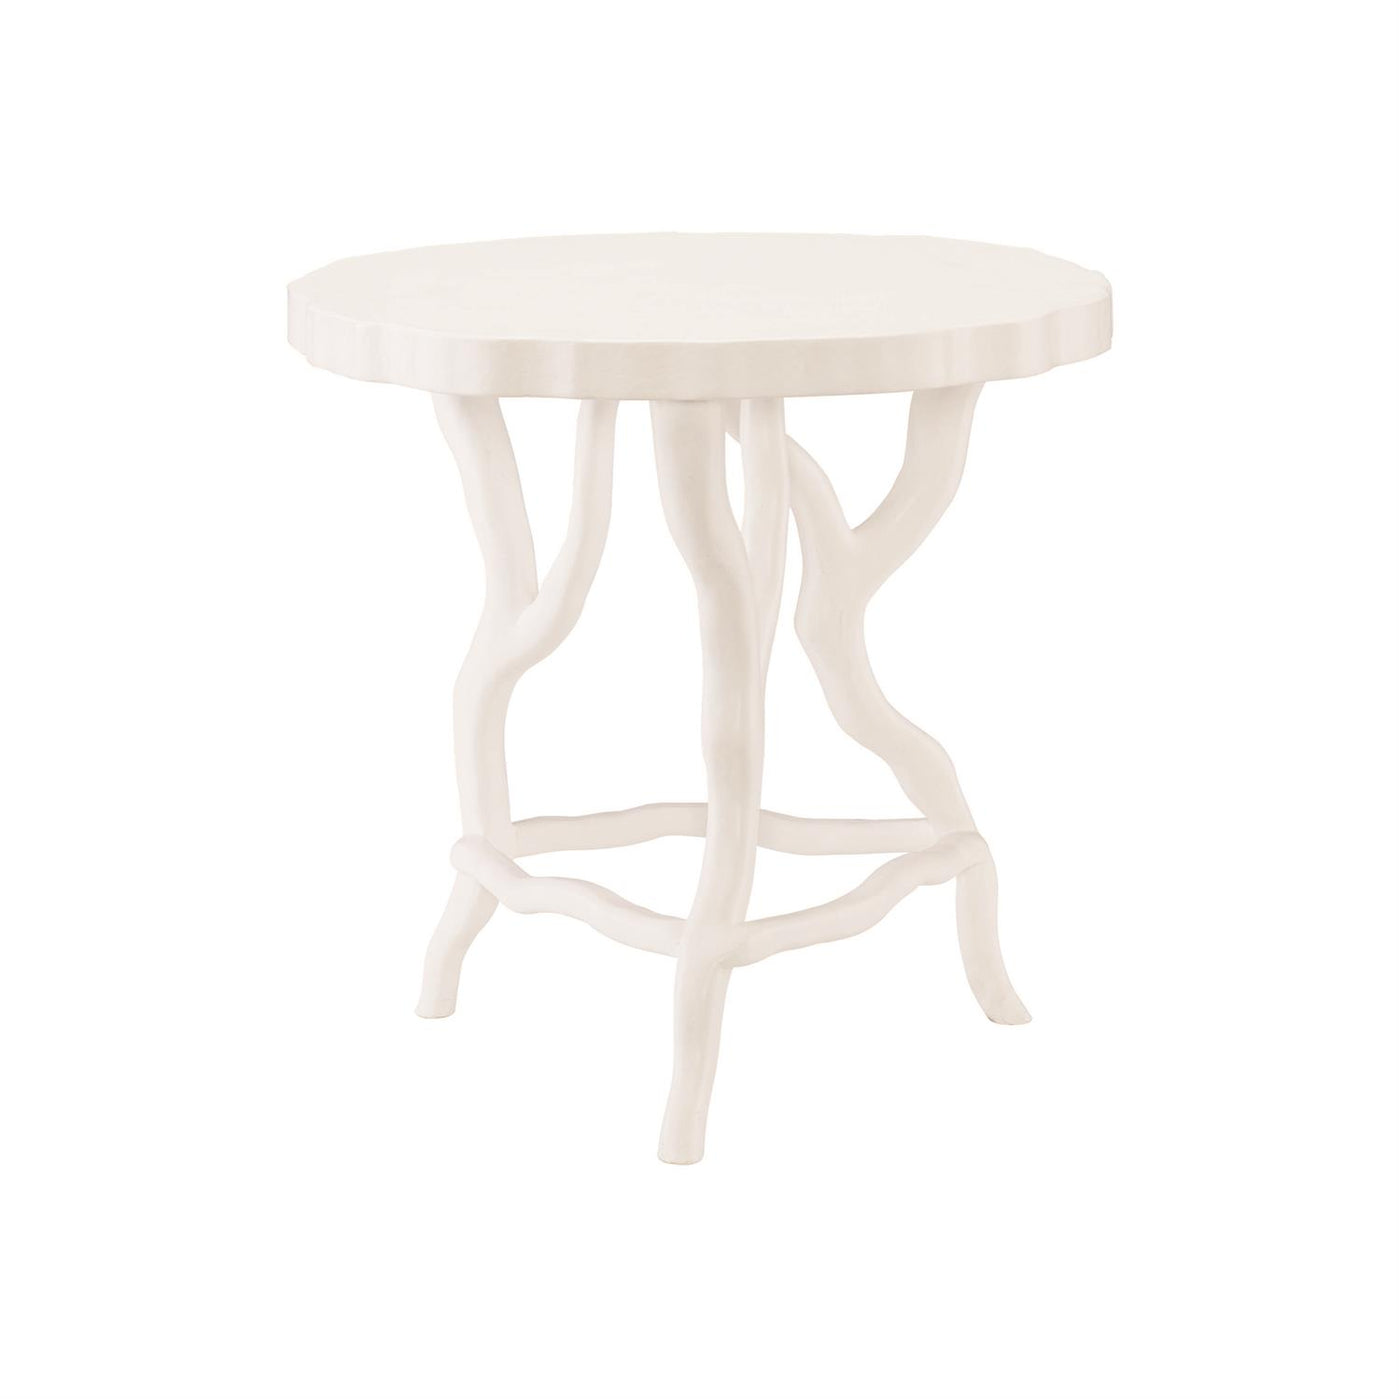 SIDE TABLE ROUND WHITE BRANCH